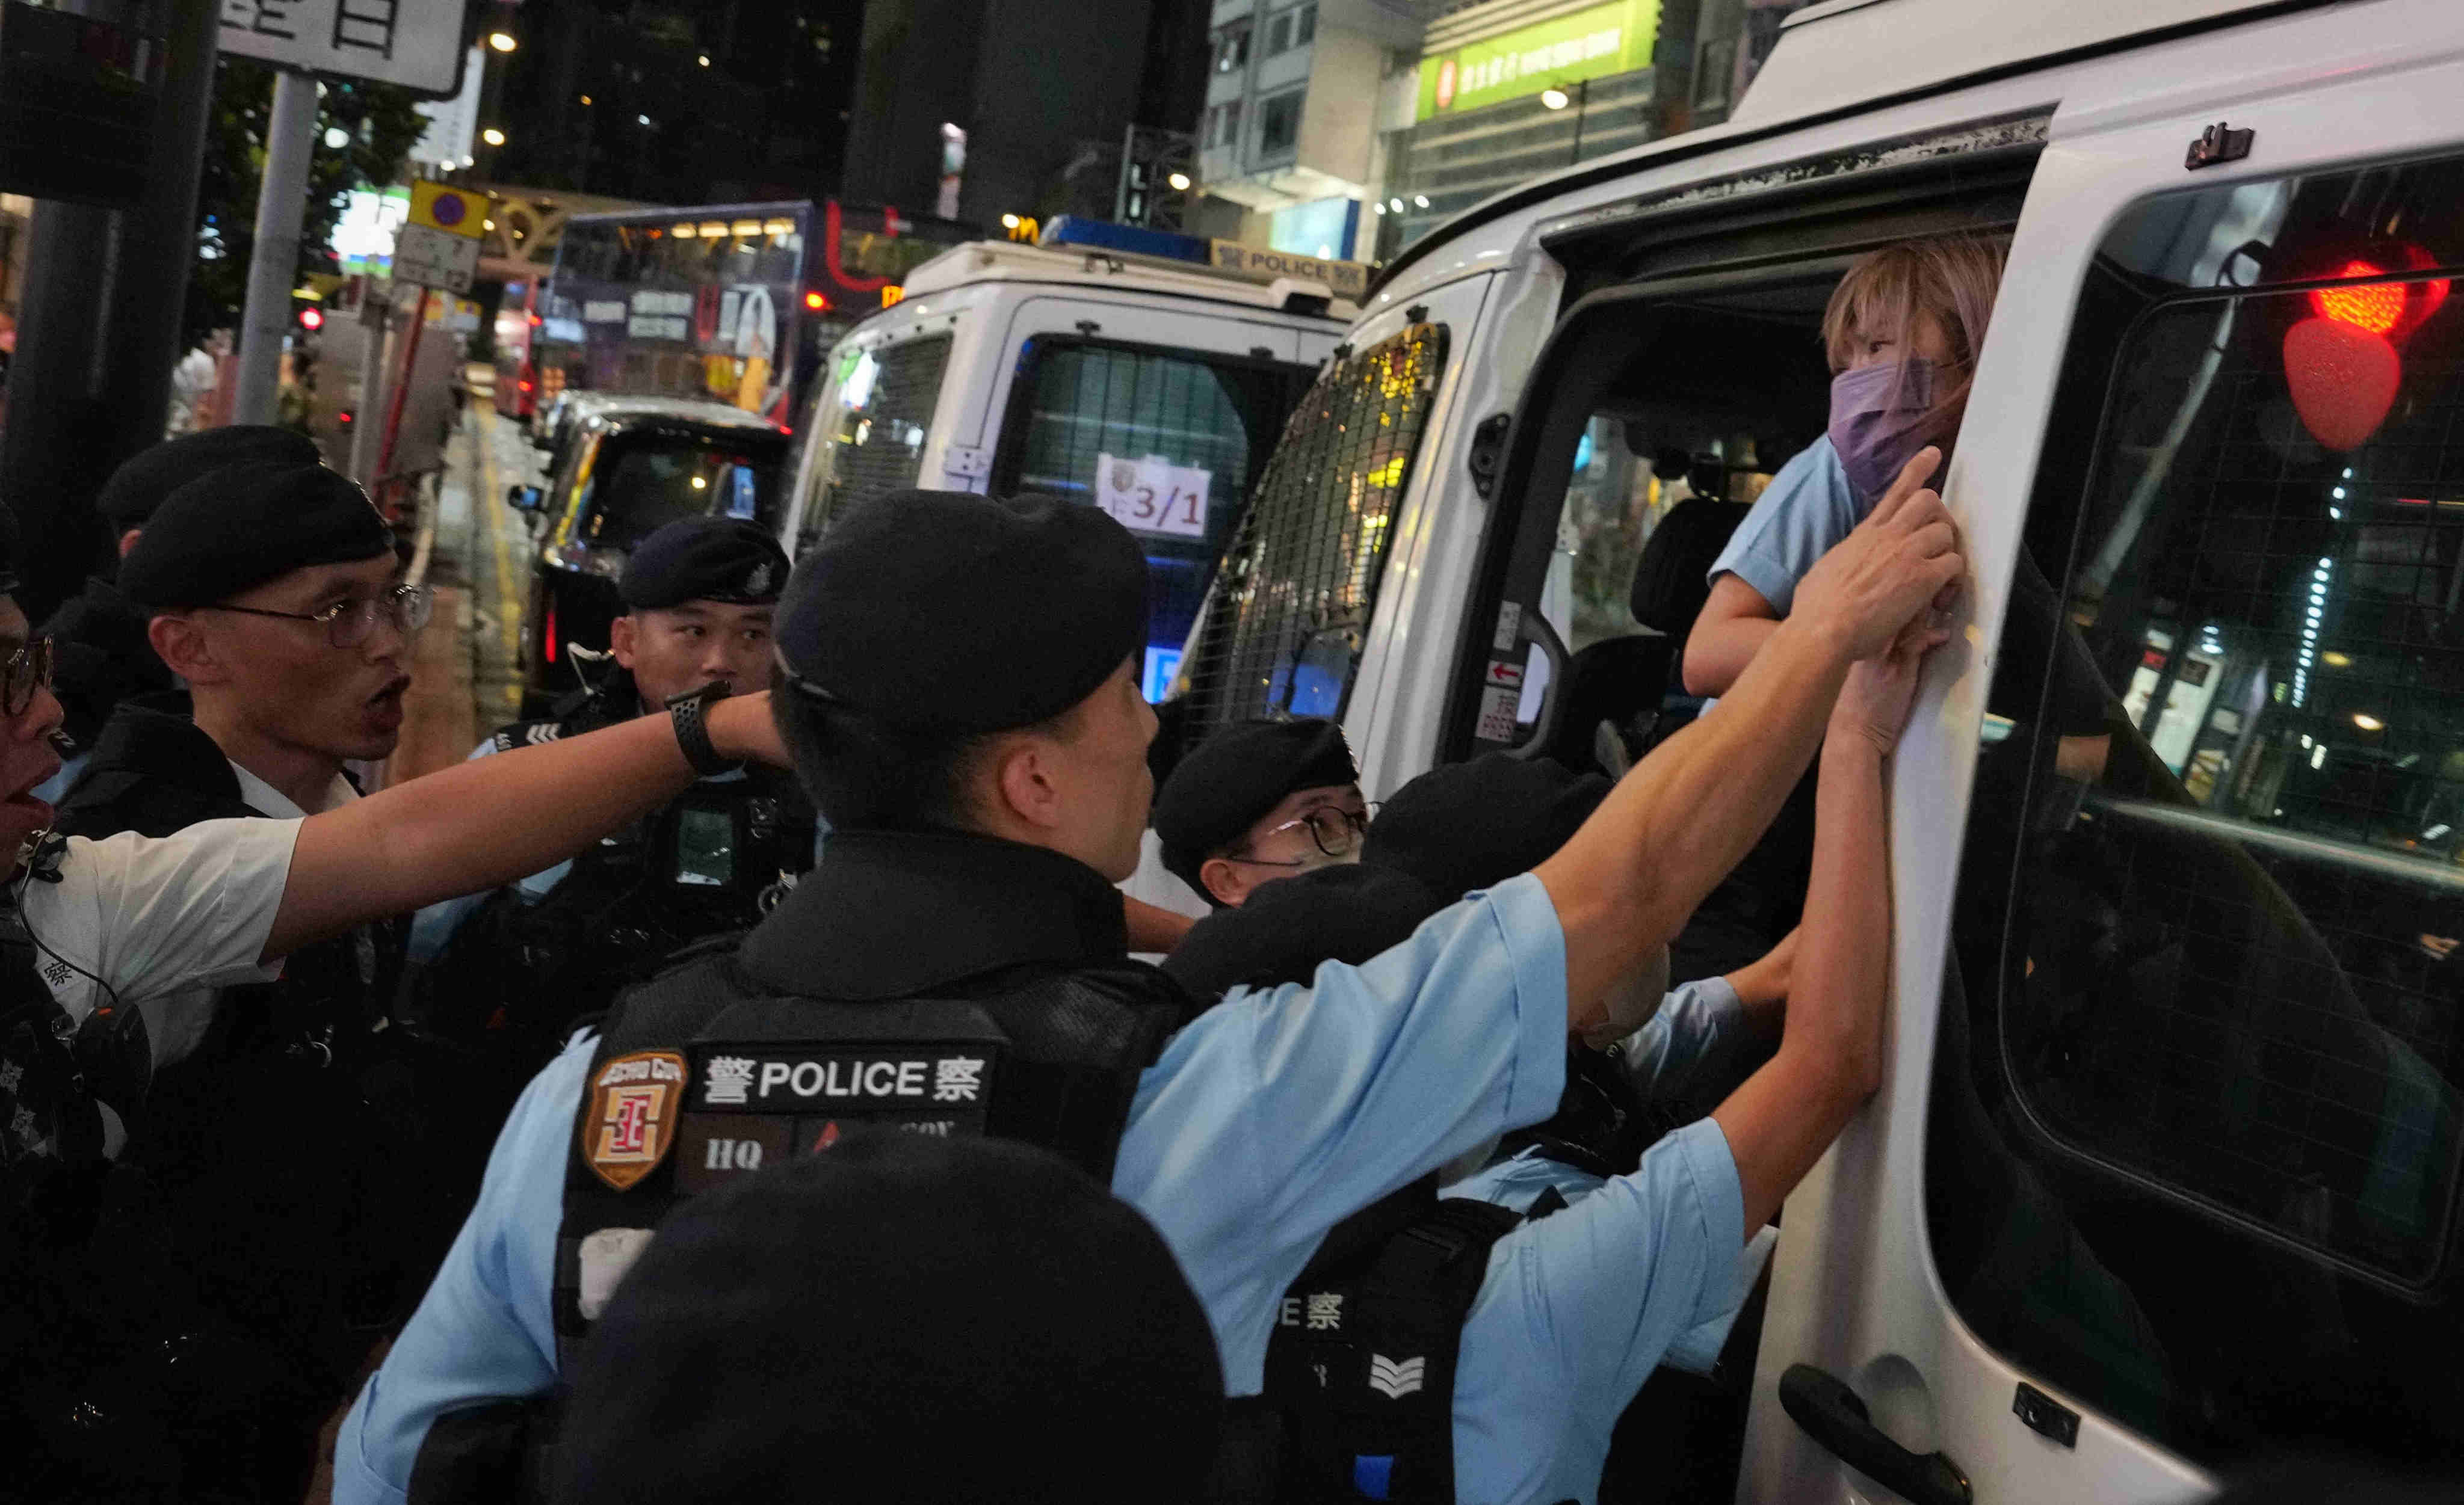 People detained by police on Sunday near the traditional Victoria Park venue for the Tiananmen Square commemoration are put in police vans. Photo: Elson Li


04JUN23   SCMP / Elson Li